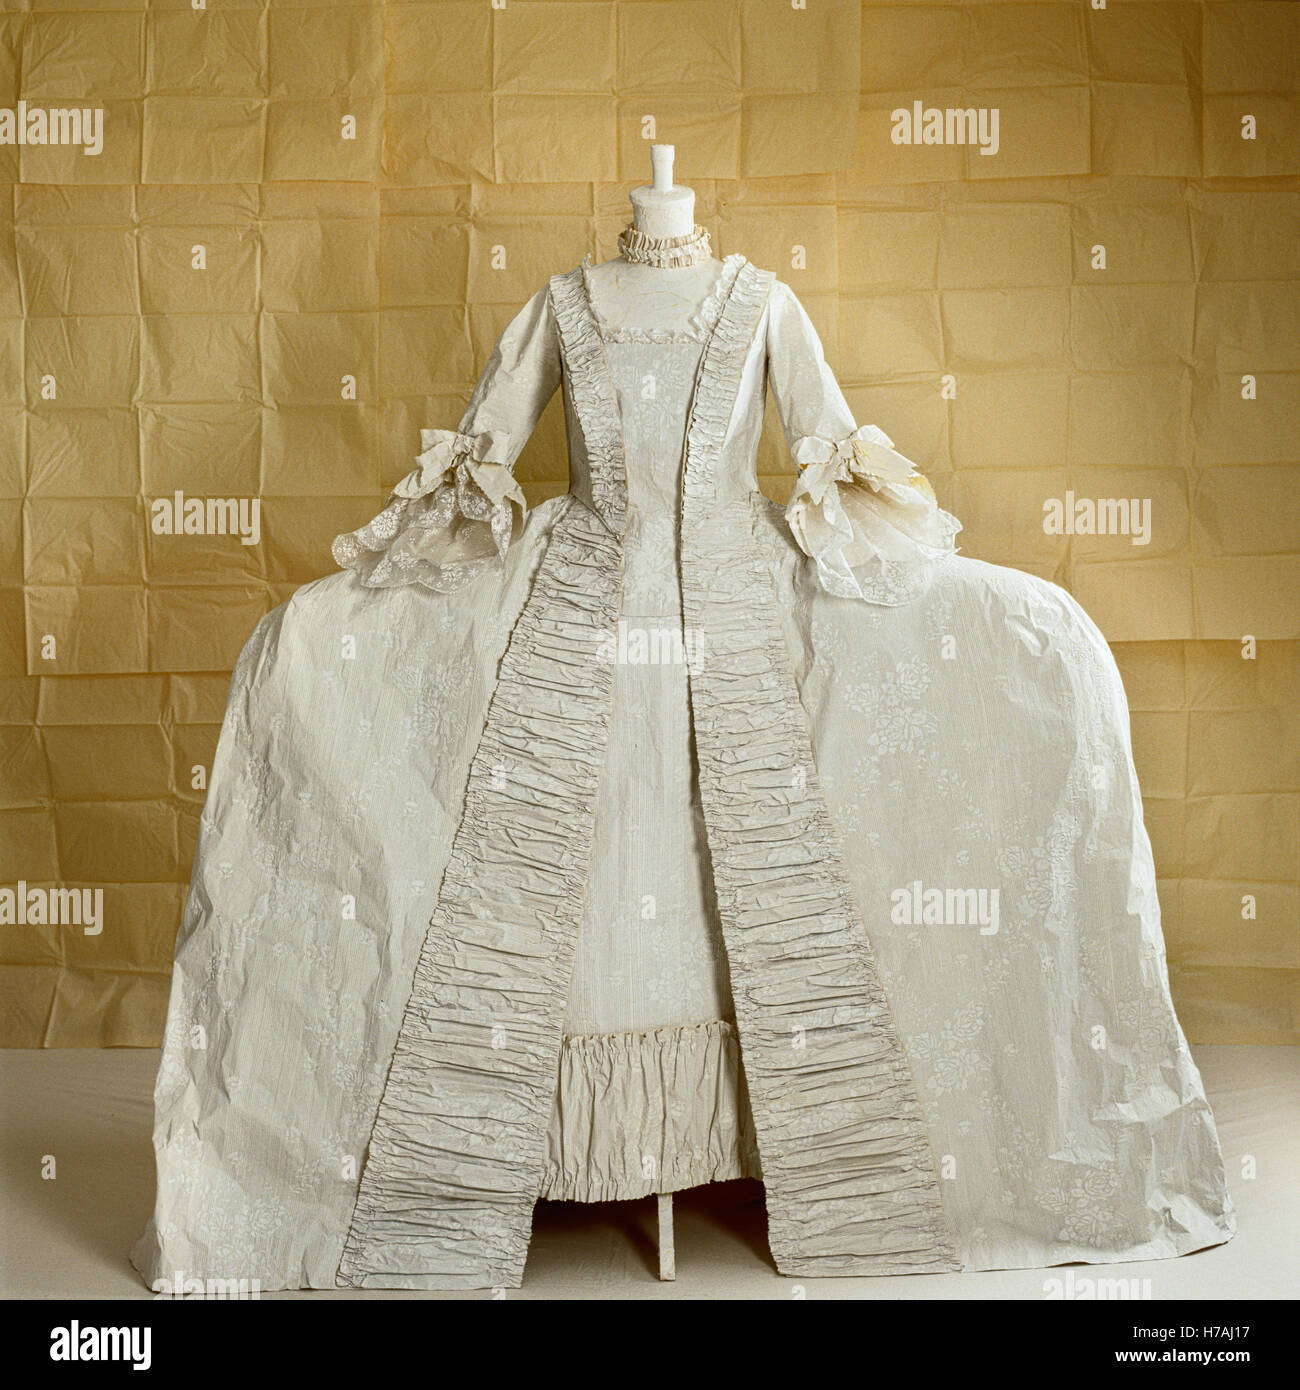 Crinoline ballgown with lace sleeves, historical replica paper dress by Isabelle de Borchgrave Stock Photo